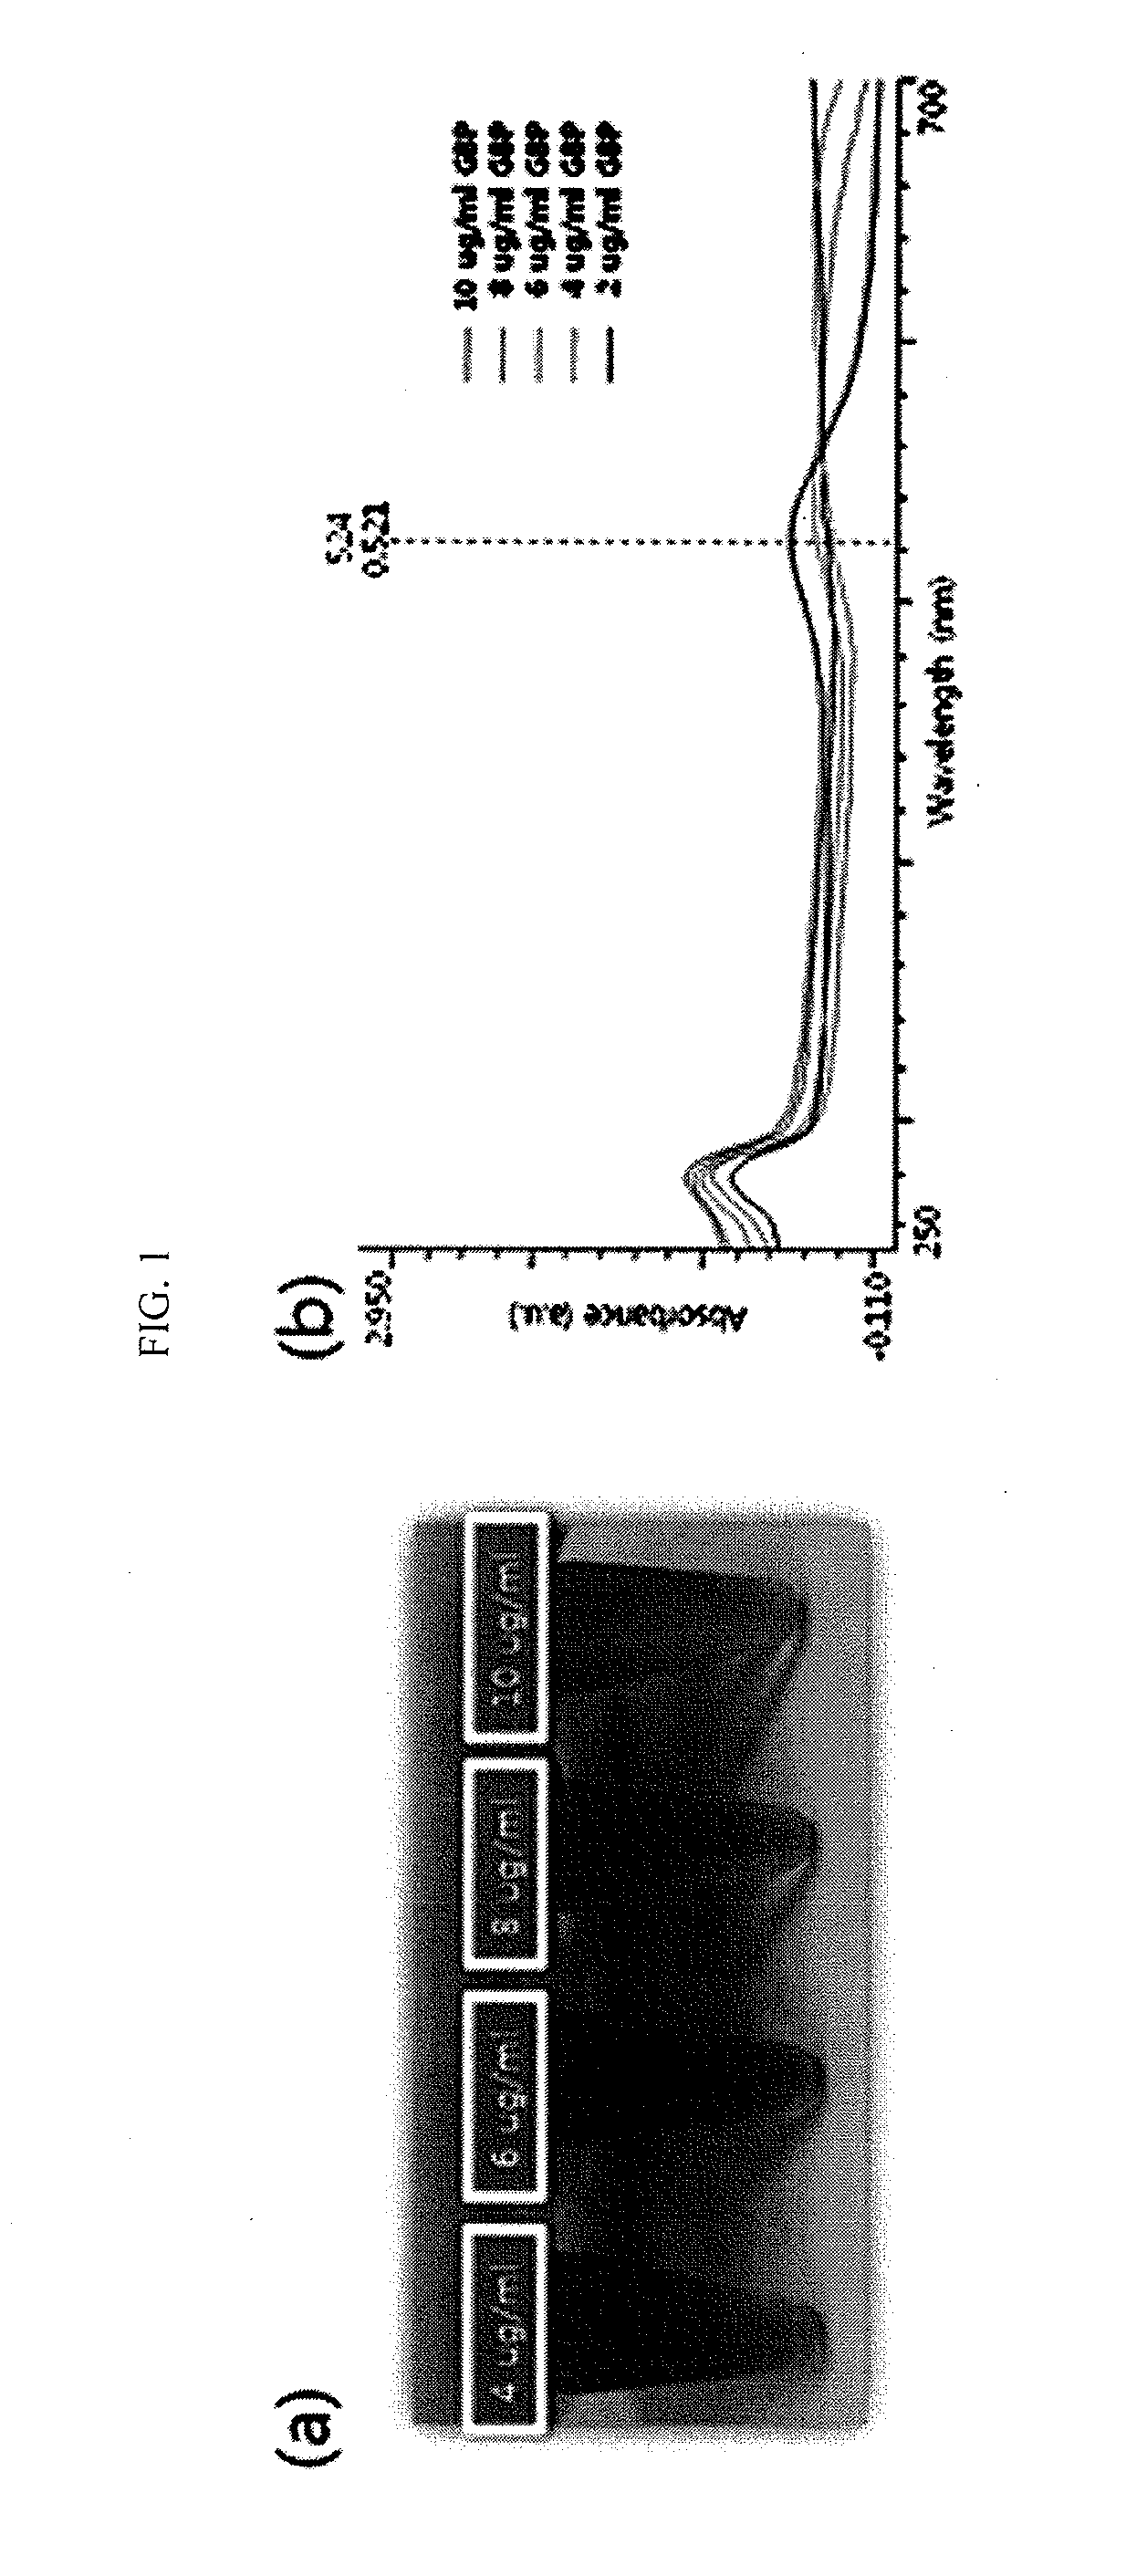 Technetium-99m labeled complex of gold nanoparticle-gold binding peptides, and method of making and using the same